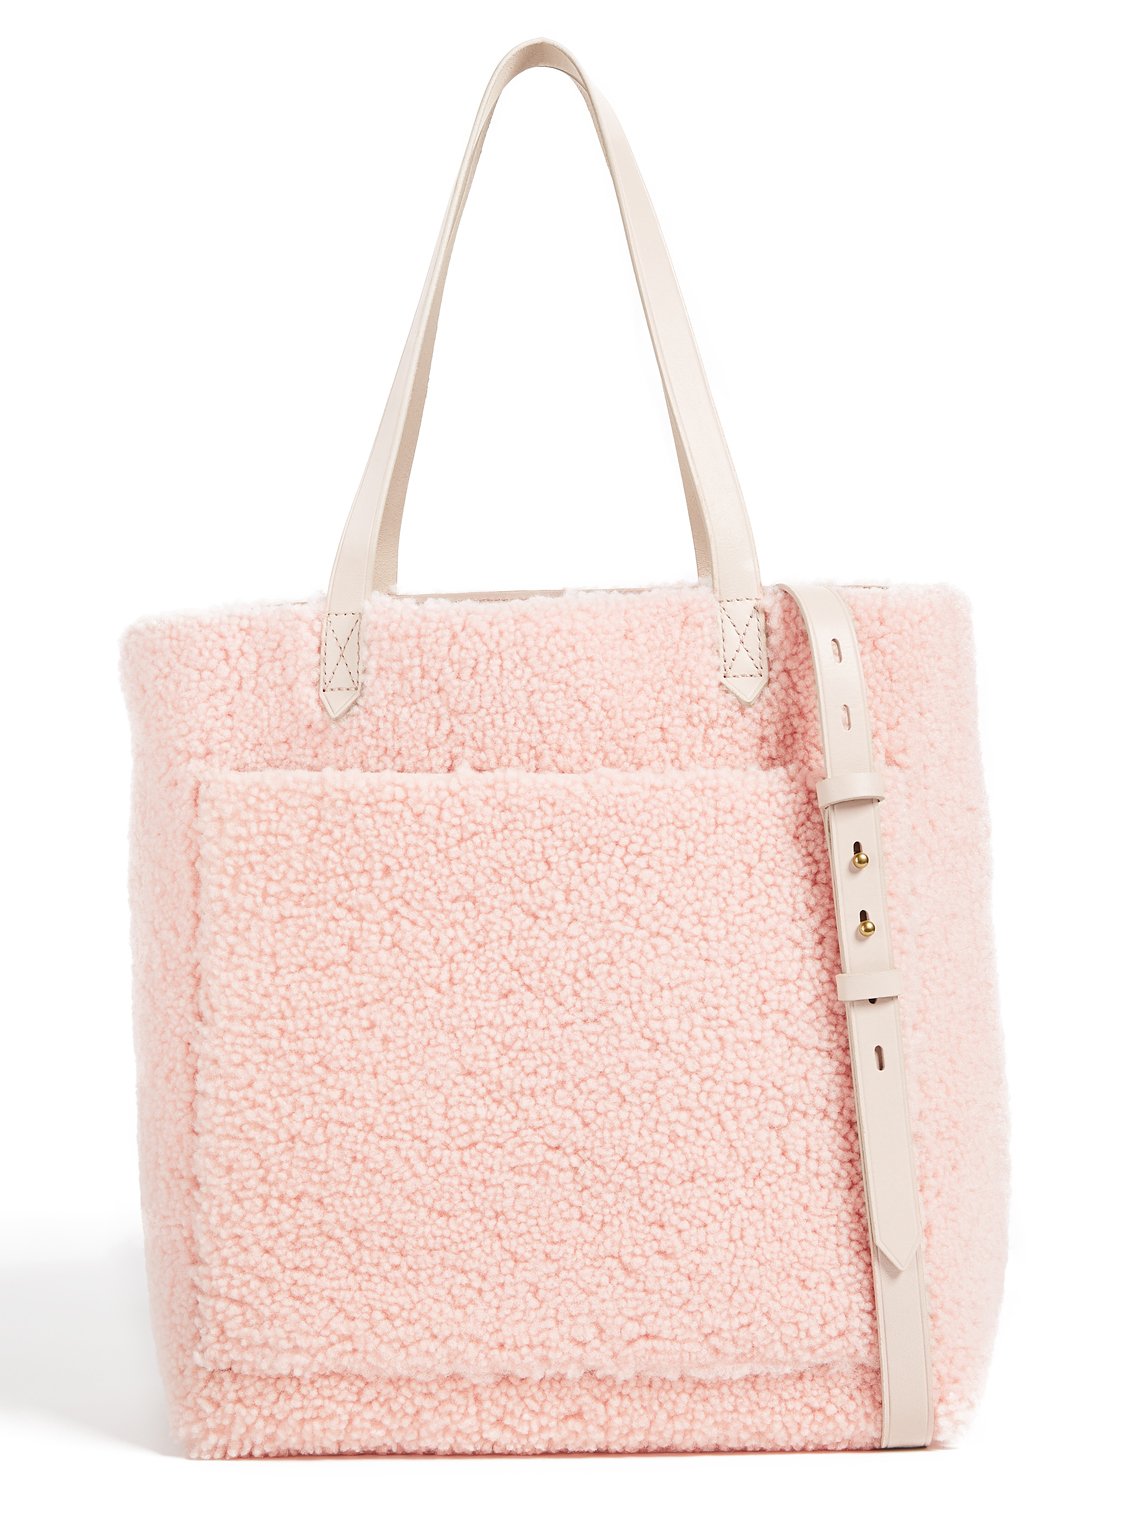 Madewell Medium Transport Tote in Shearling - Avalon Pink